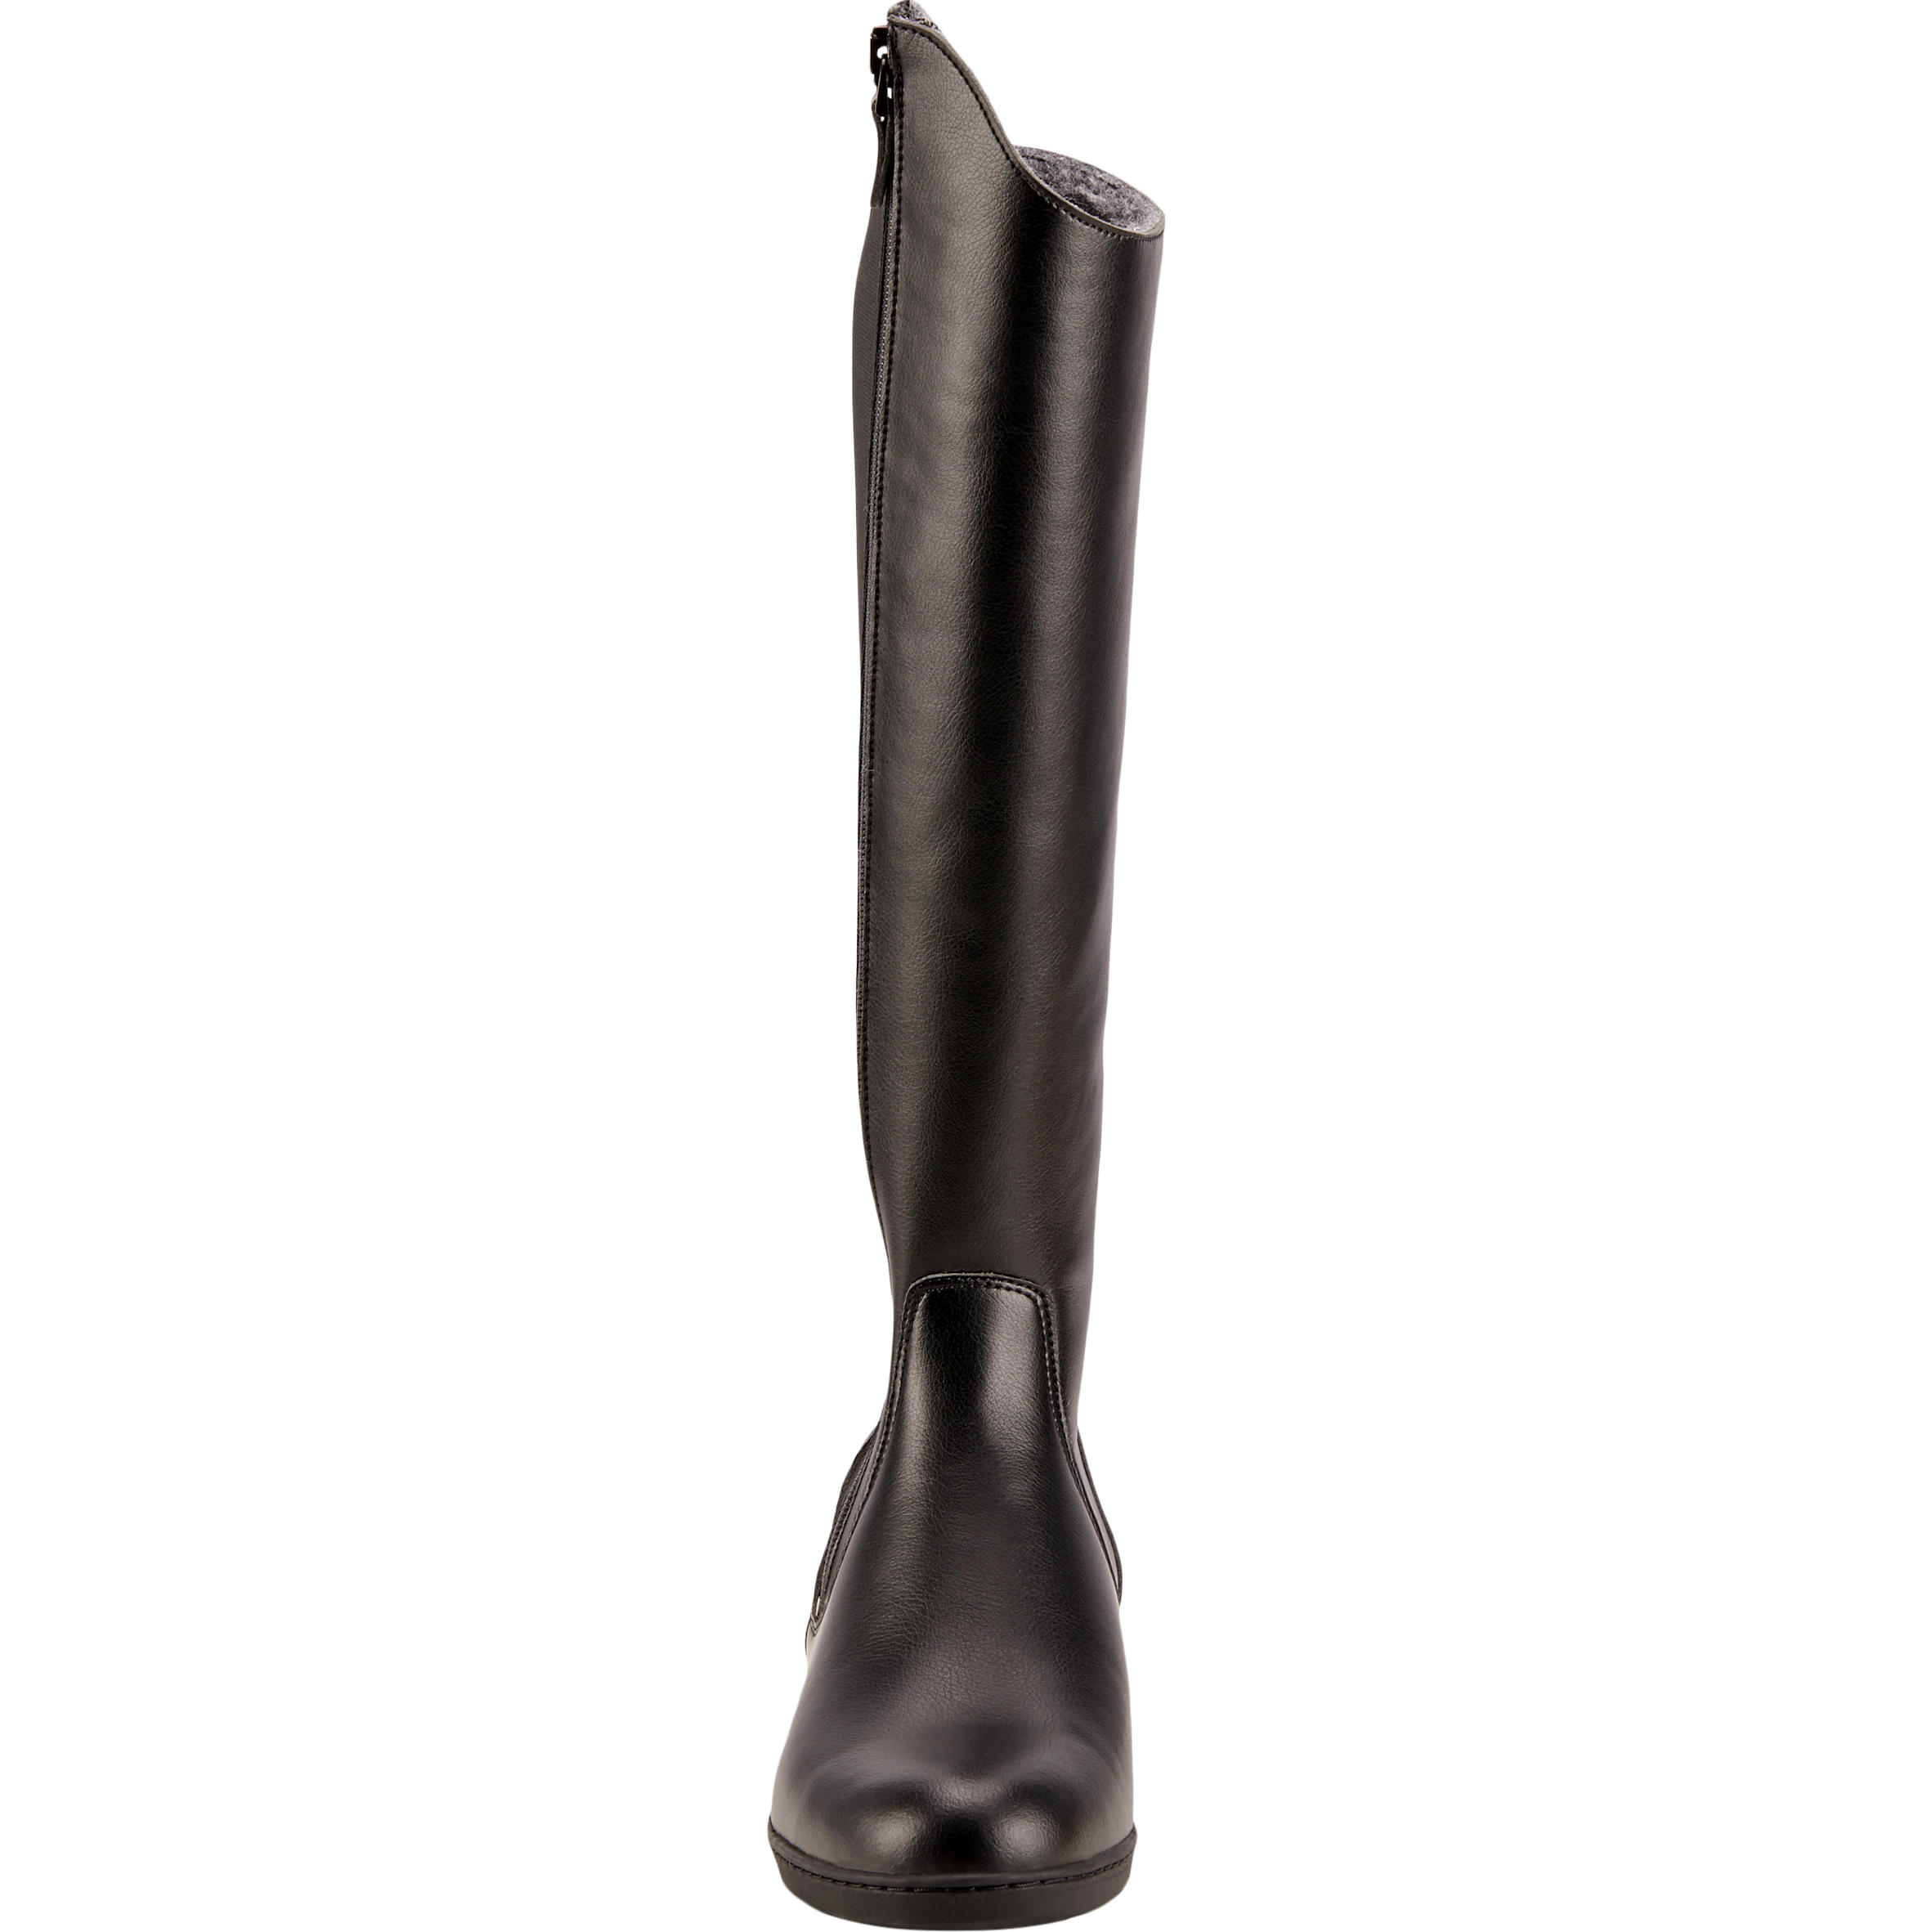 500 Warm Adult Horse Riding  Long Boots - Black 3/7